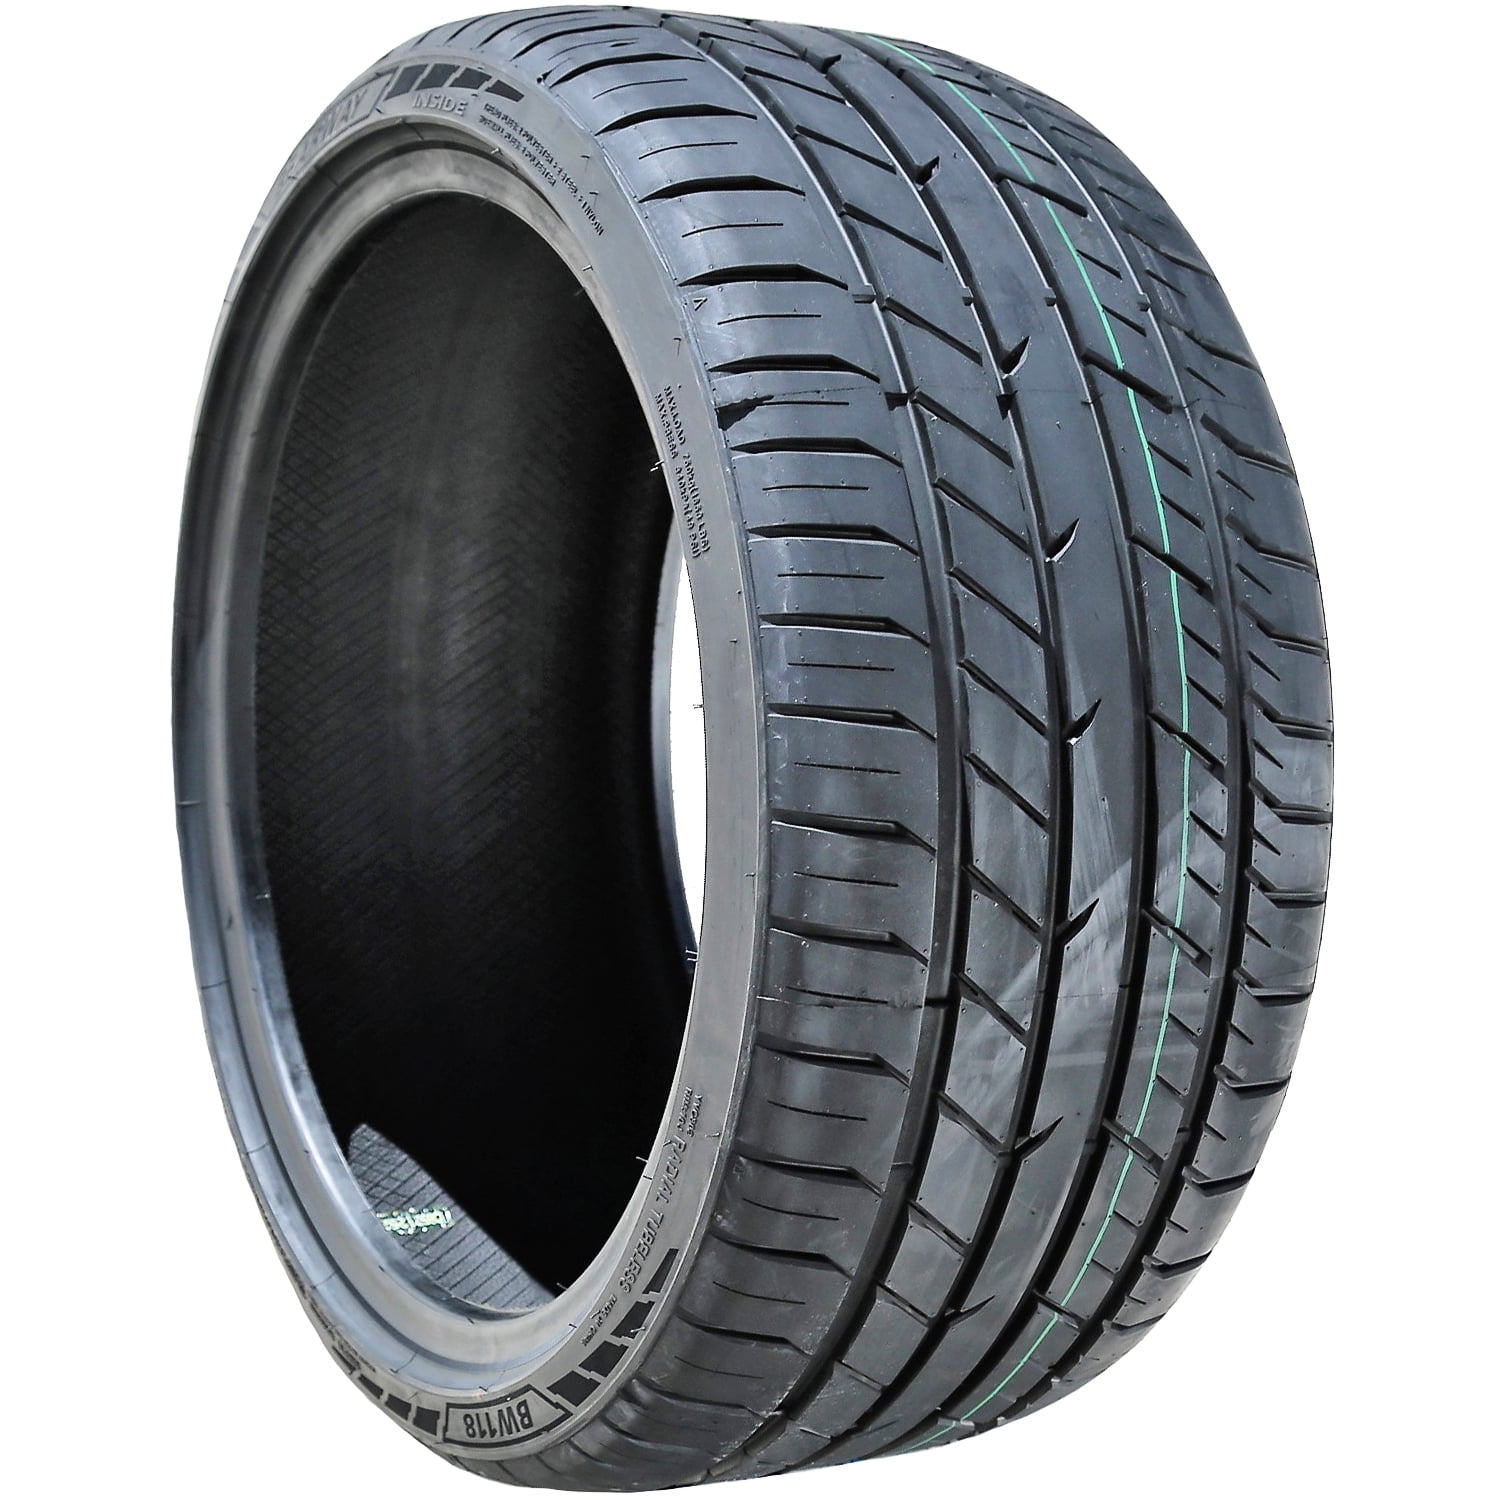 Toyo Proxes R888R Competition tires 325/30R20 – Zaimmotorsports